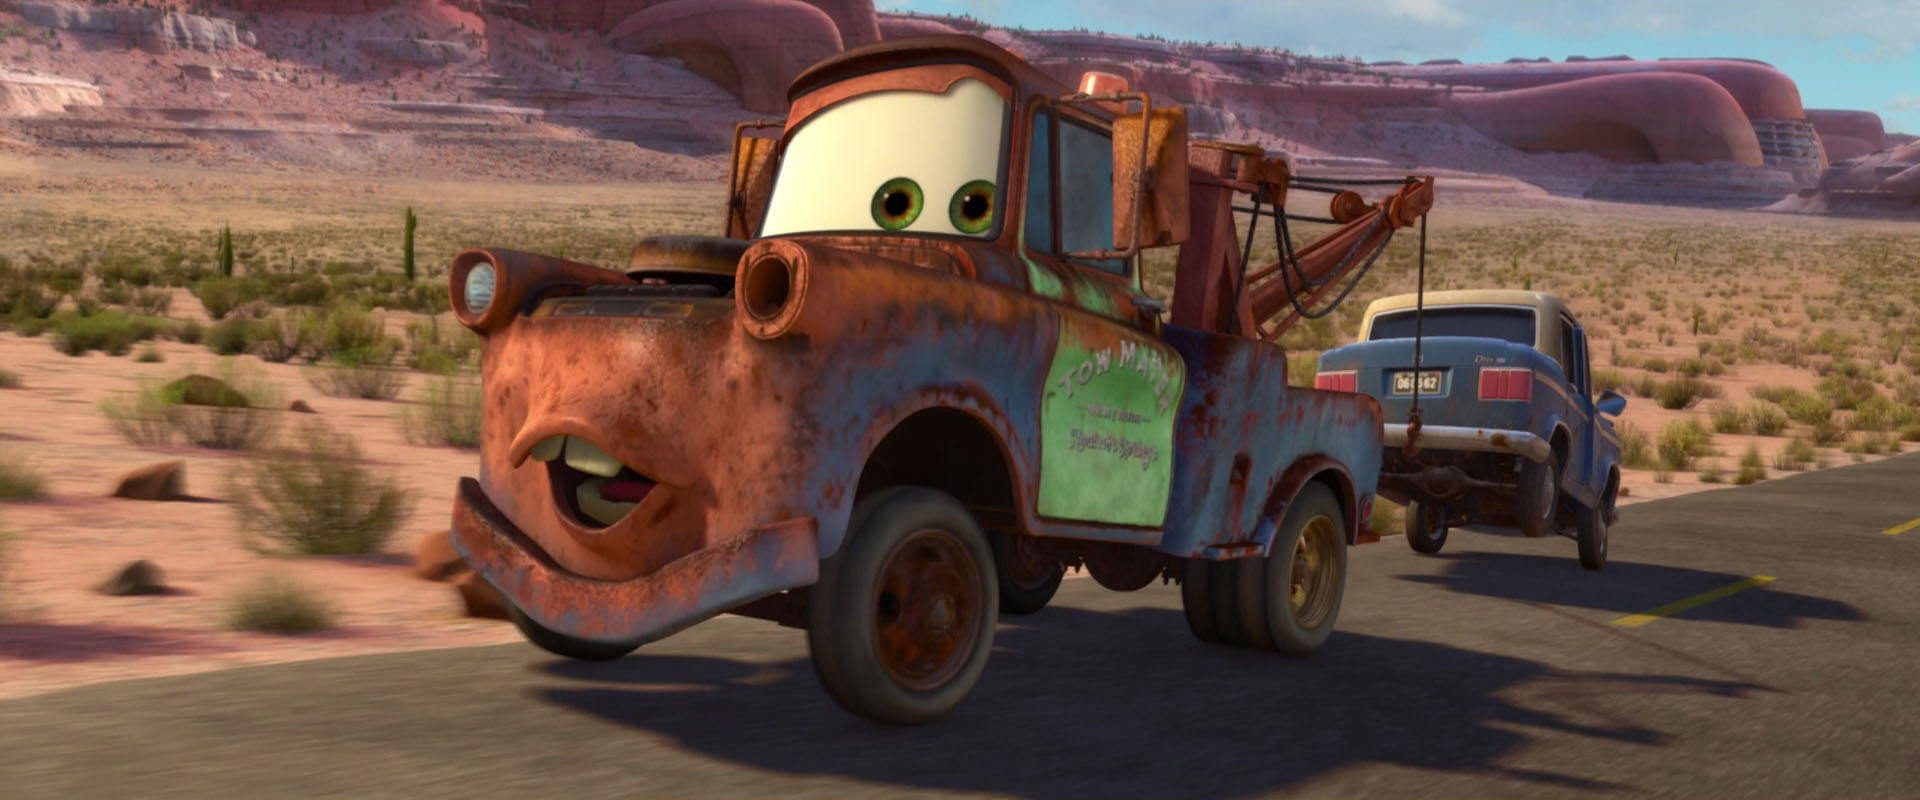 Mater, Character From “Cars”. | Pixar-Planet.fr concernant Flash Mcqueen Martin 